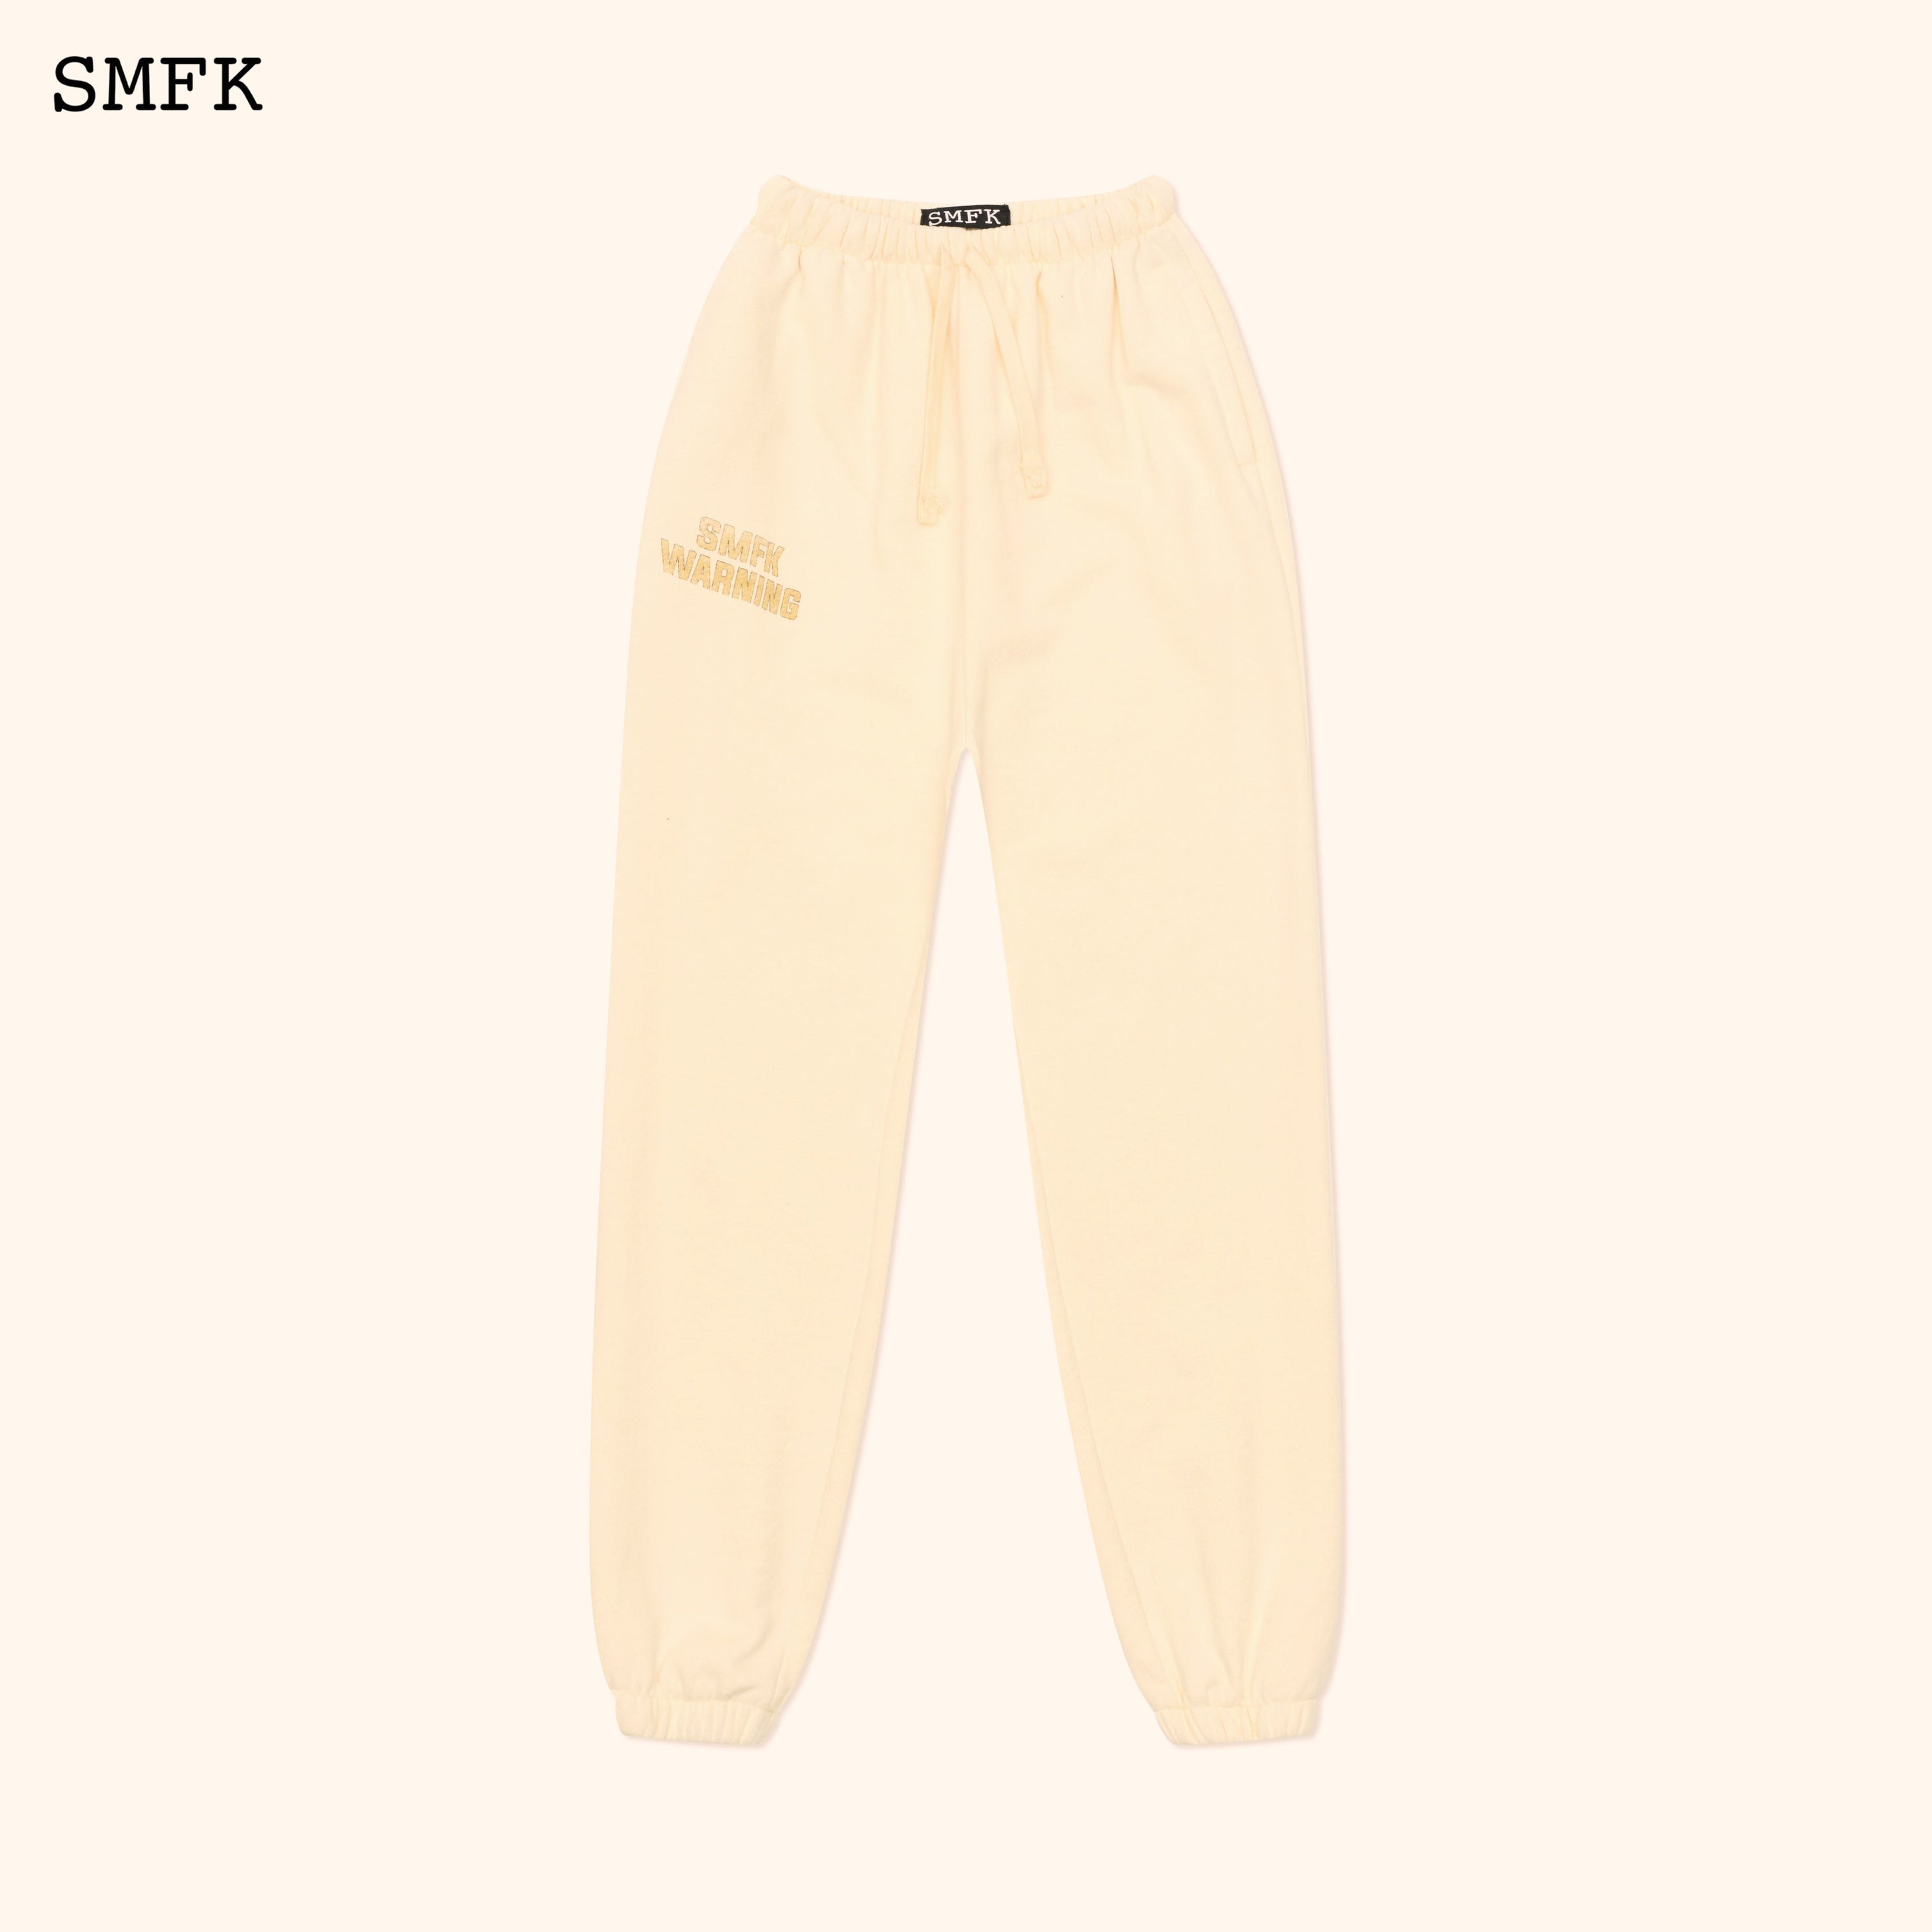 Compass Vintage College Jogging Pants In Cream - SMFK Official